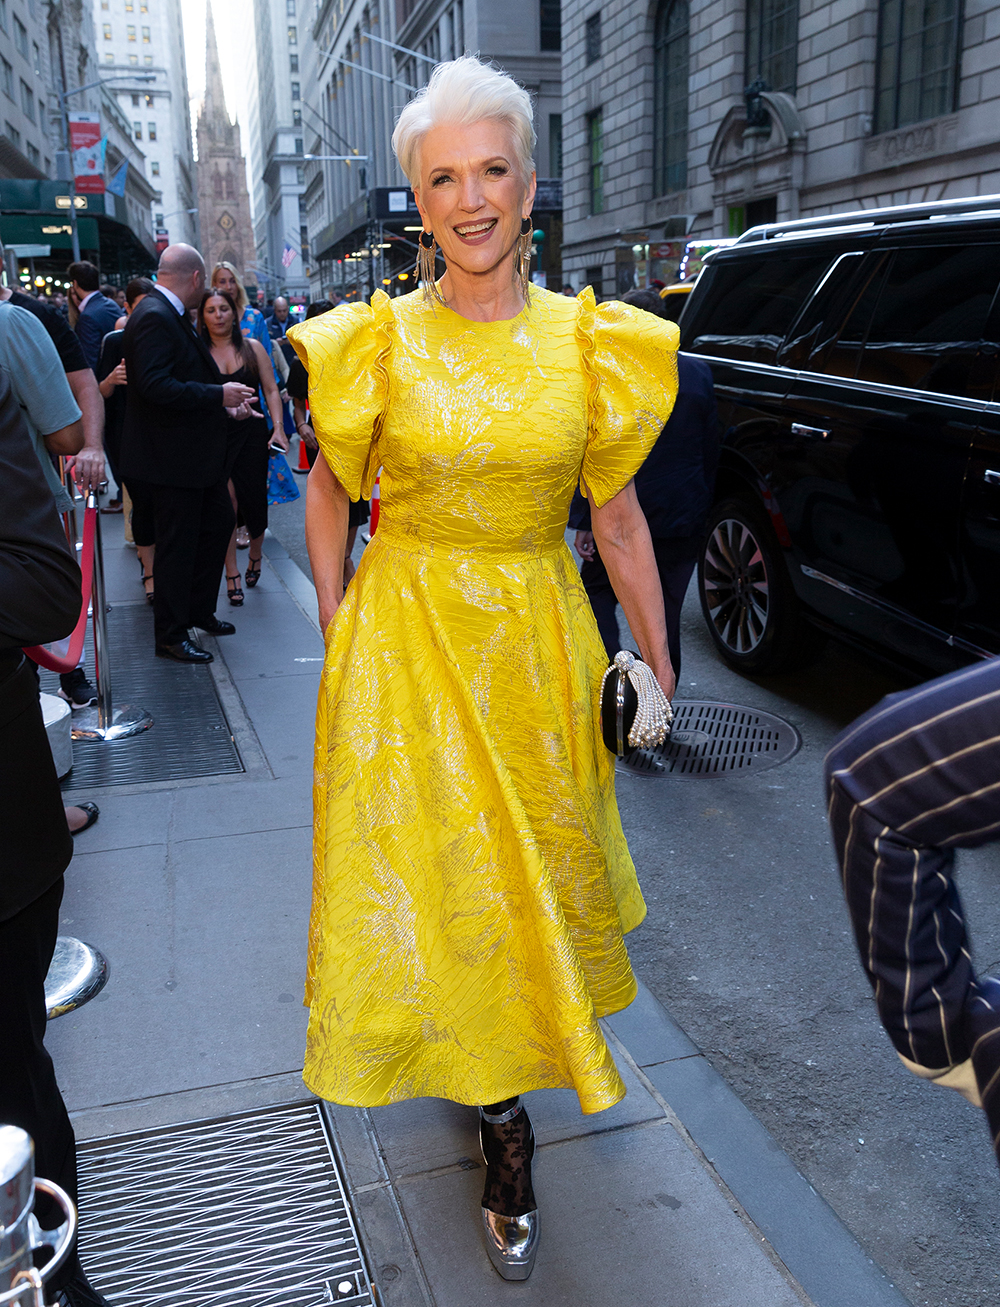 over 50 fashion and clothing inspiration: Maye Musk wearing a yellow brocade dress with silver shoes